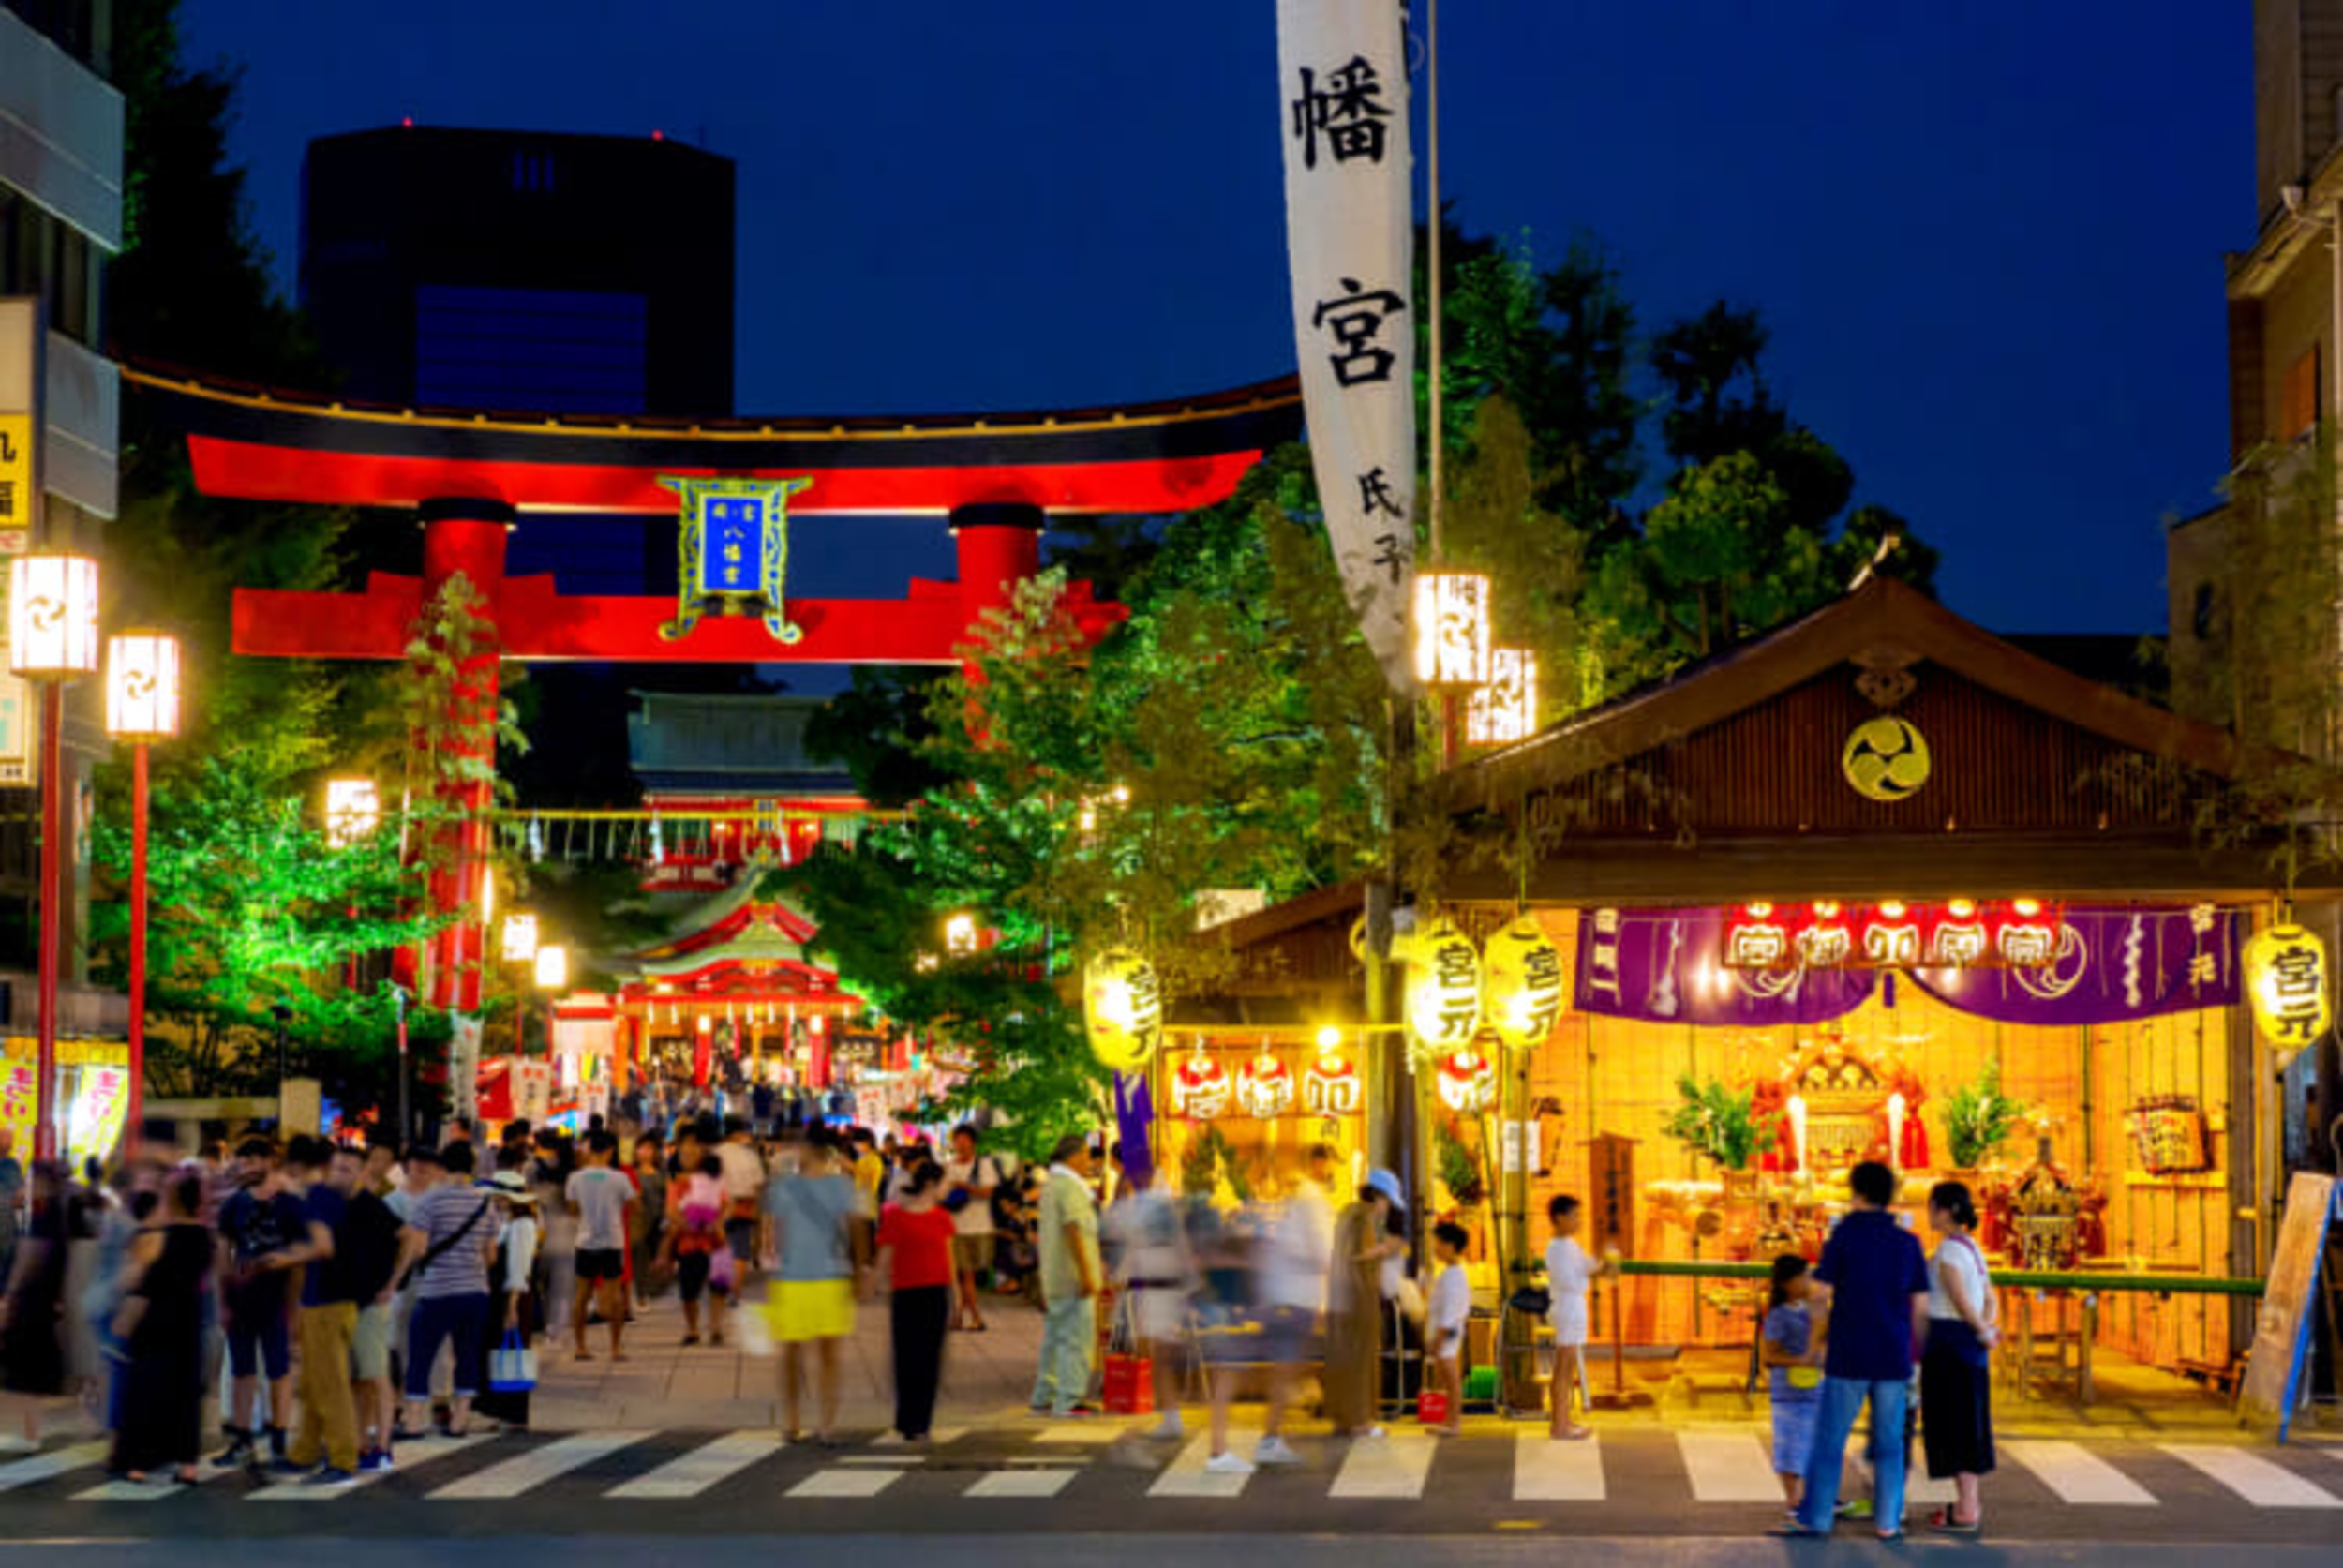 <p>Wander the ancient streets of Monzen Nackaco at night, when the golden leaves are lit above you, and the street vendors glow with red. As medieval drums pound in the background, you'll find yourself lost in a maze of historical grandeur.</p><p>You may also like: <a href='https://www.yardbarker.com/lifestyle/articles/20_slow_cooker_recipes_with_six_ingredients_or_fewer_031224/s1__39117846'>20 slow-cooker recipes with six ingredients or fewer</a></p>